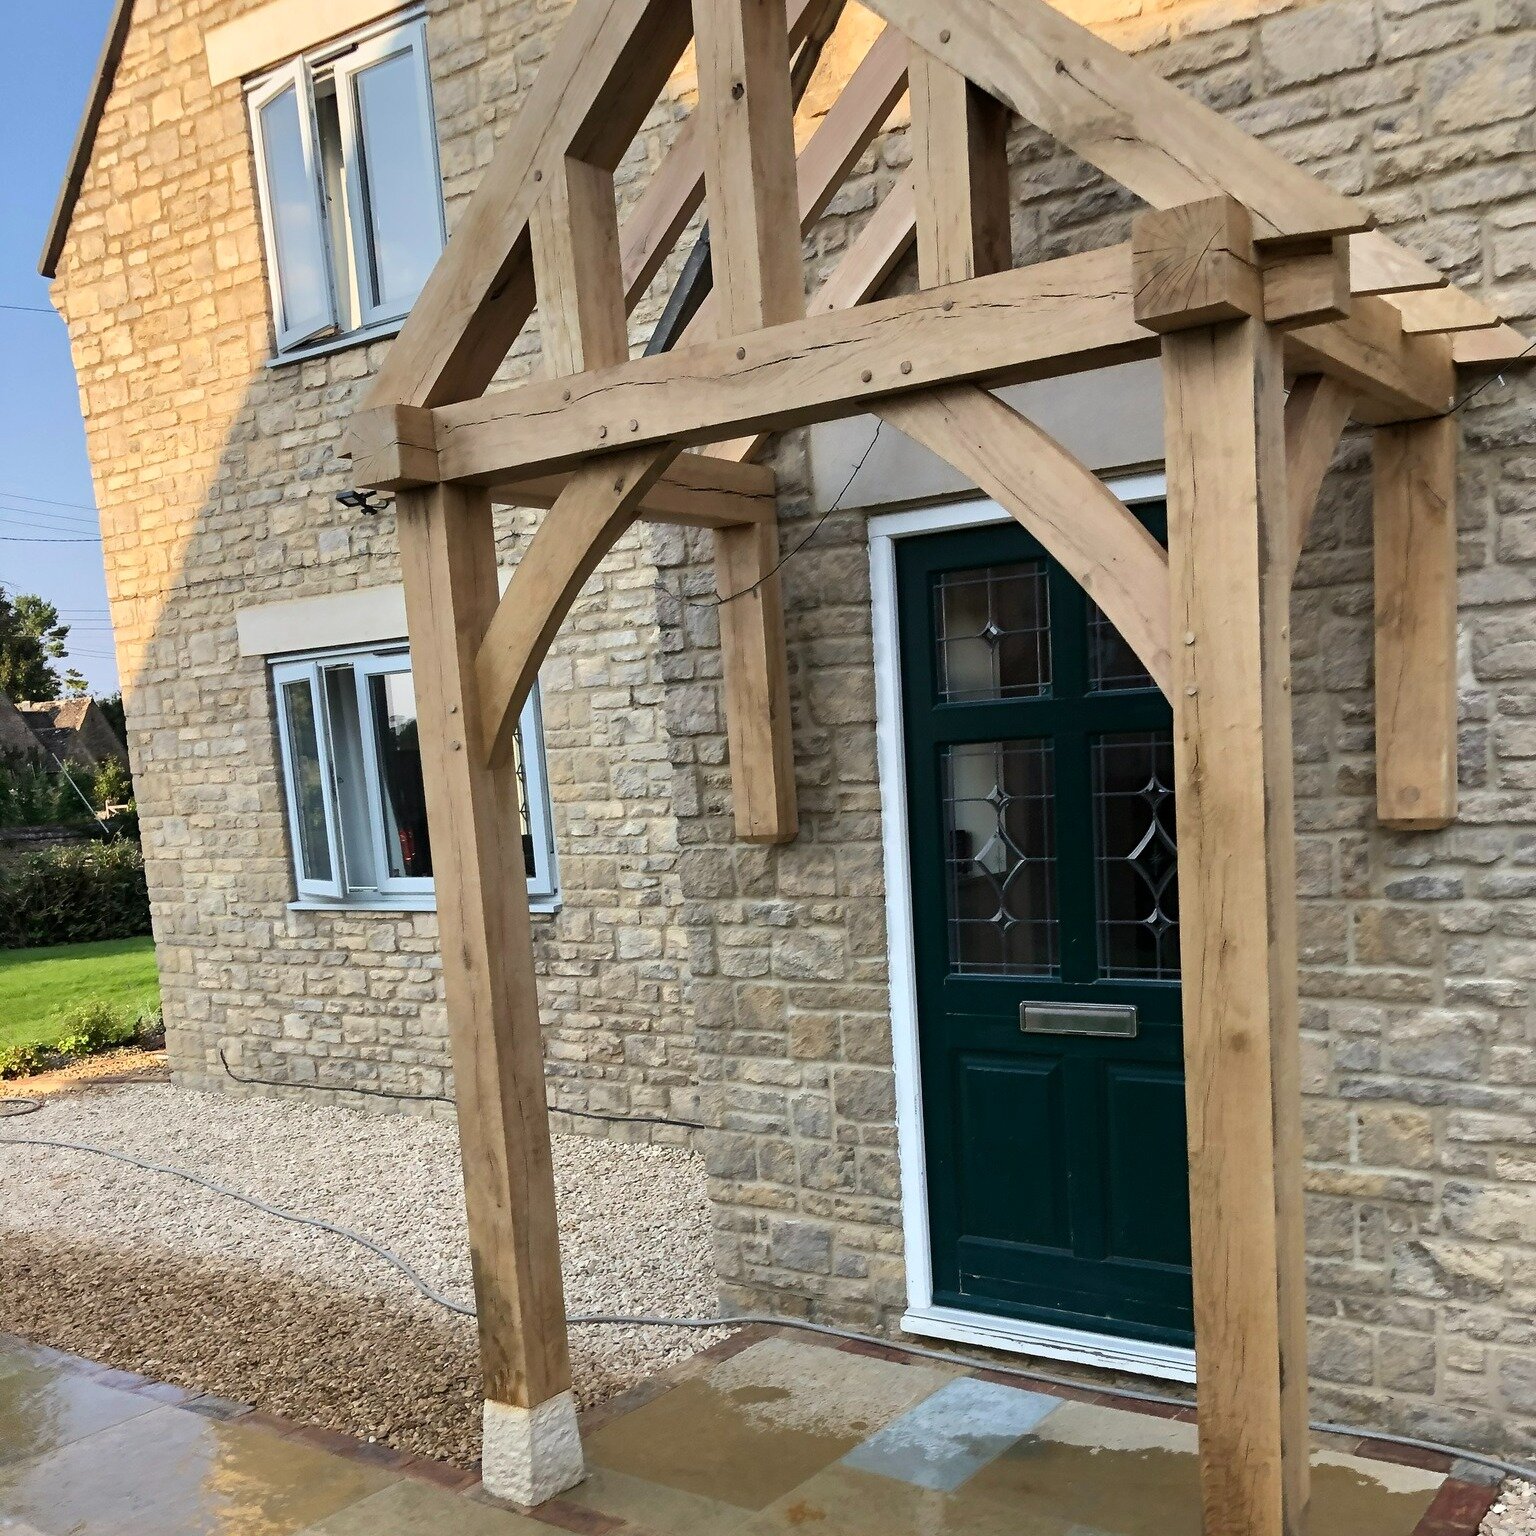 As well as planting design, we can also design structural features such as pergolas and arches, and work with some excellent local landscapers to turn the plans into reality.
We designed some rustic, yet modern structures for our &quot;Contemporary C